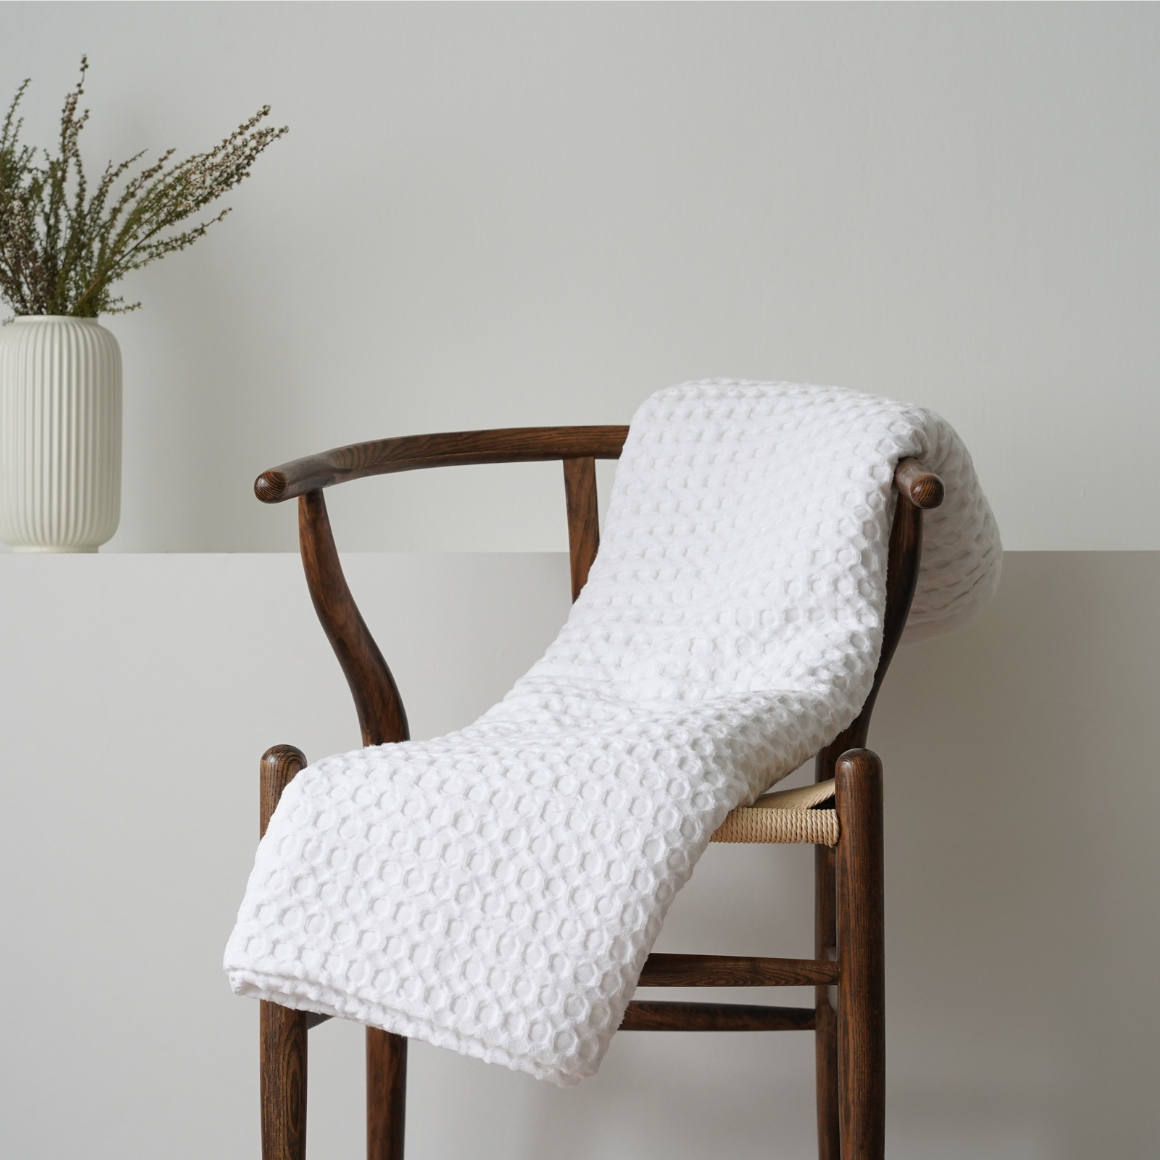 Waffle knit blanket Cotton throw blanket on chair  